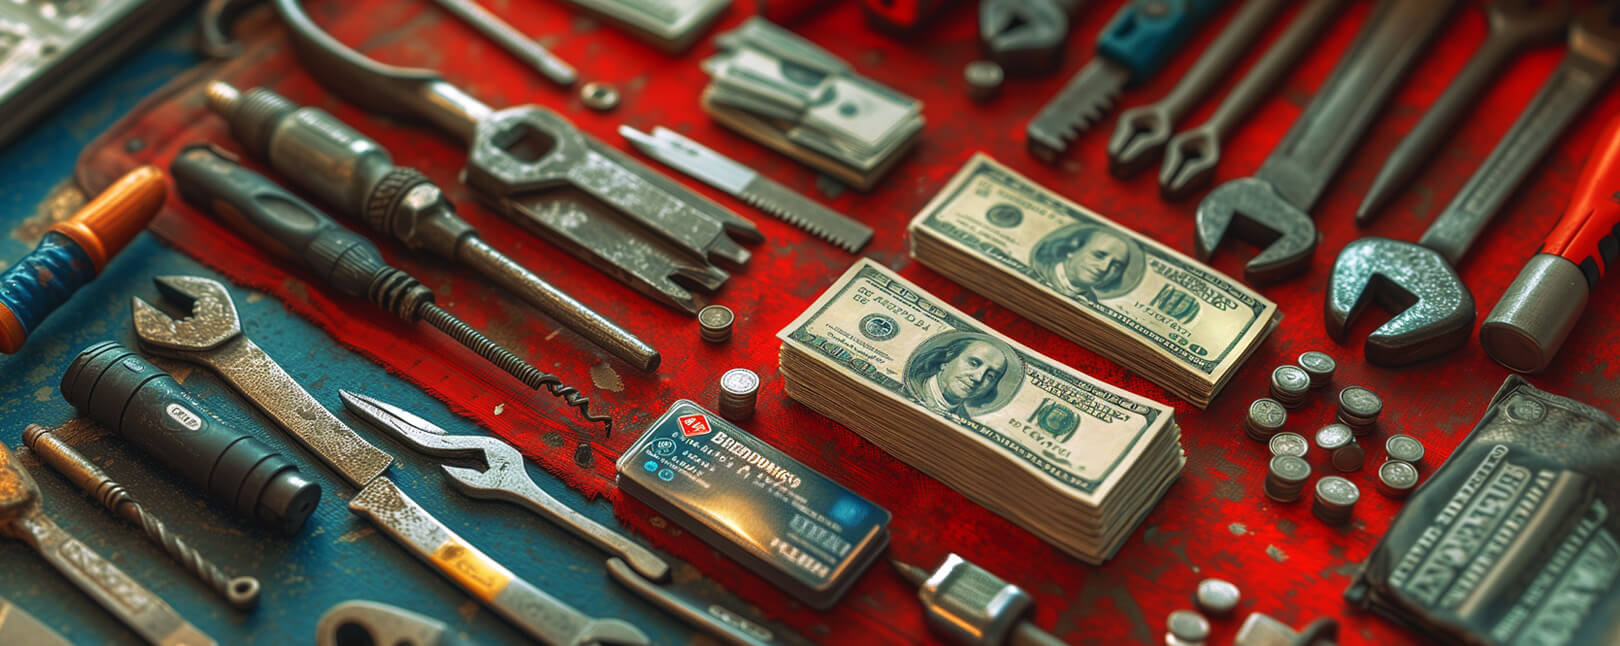 Chargeback Prevention Tools